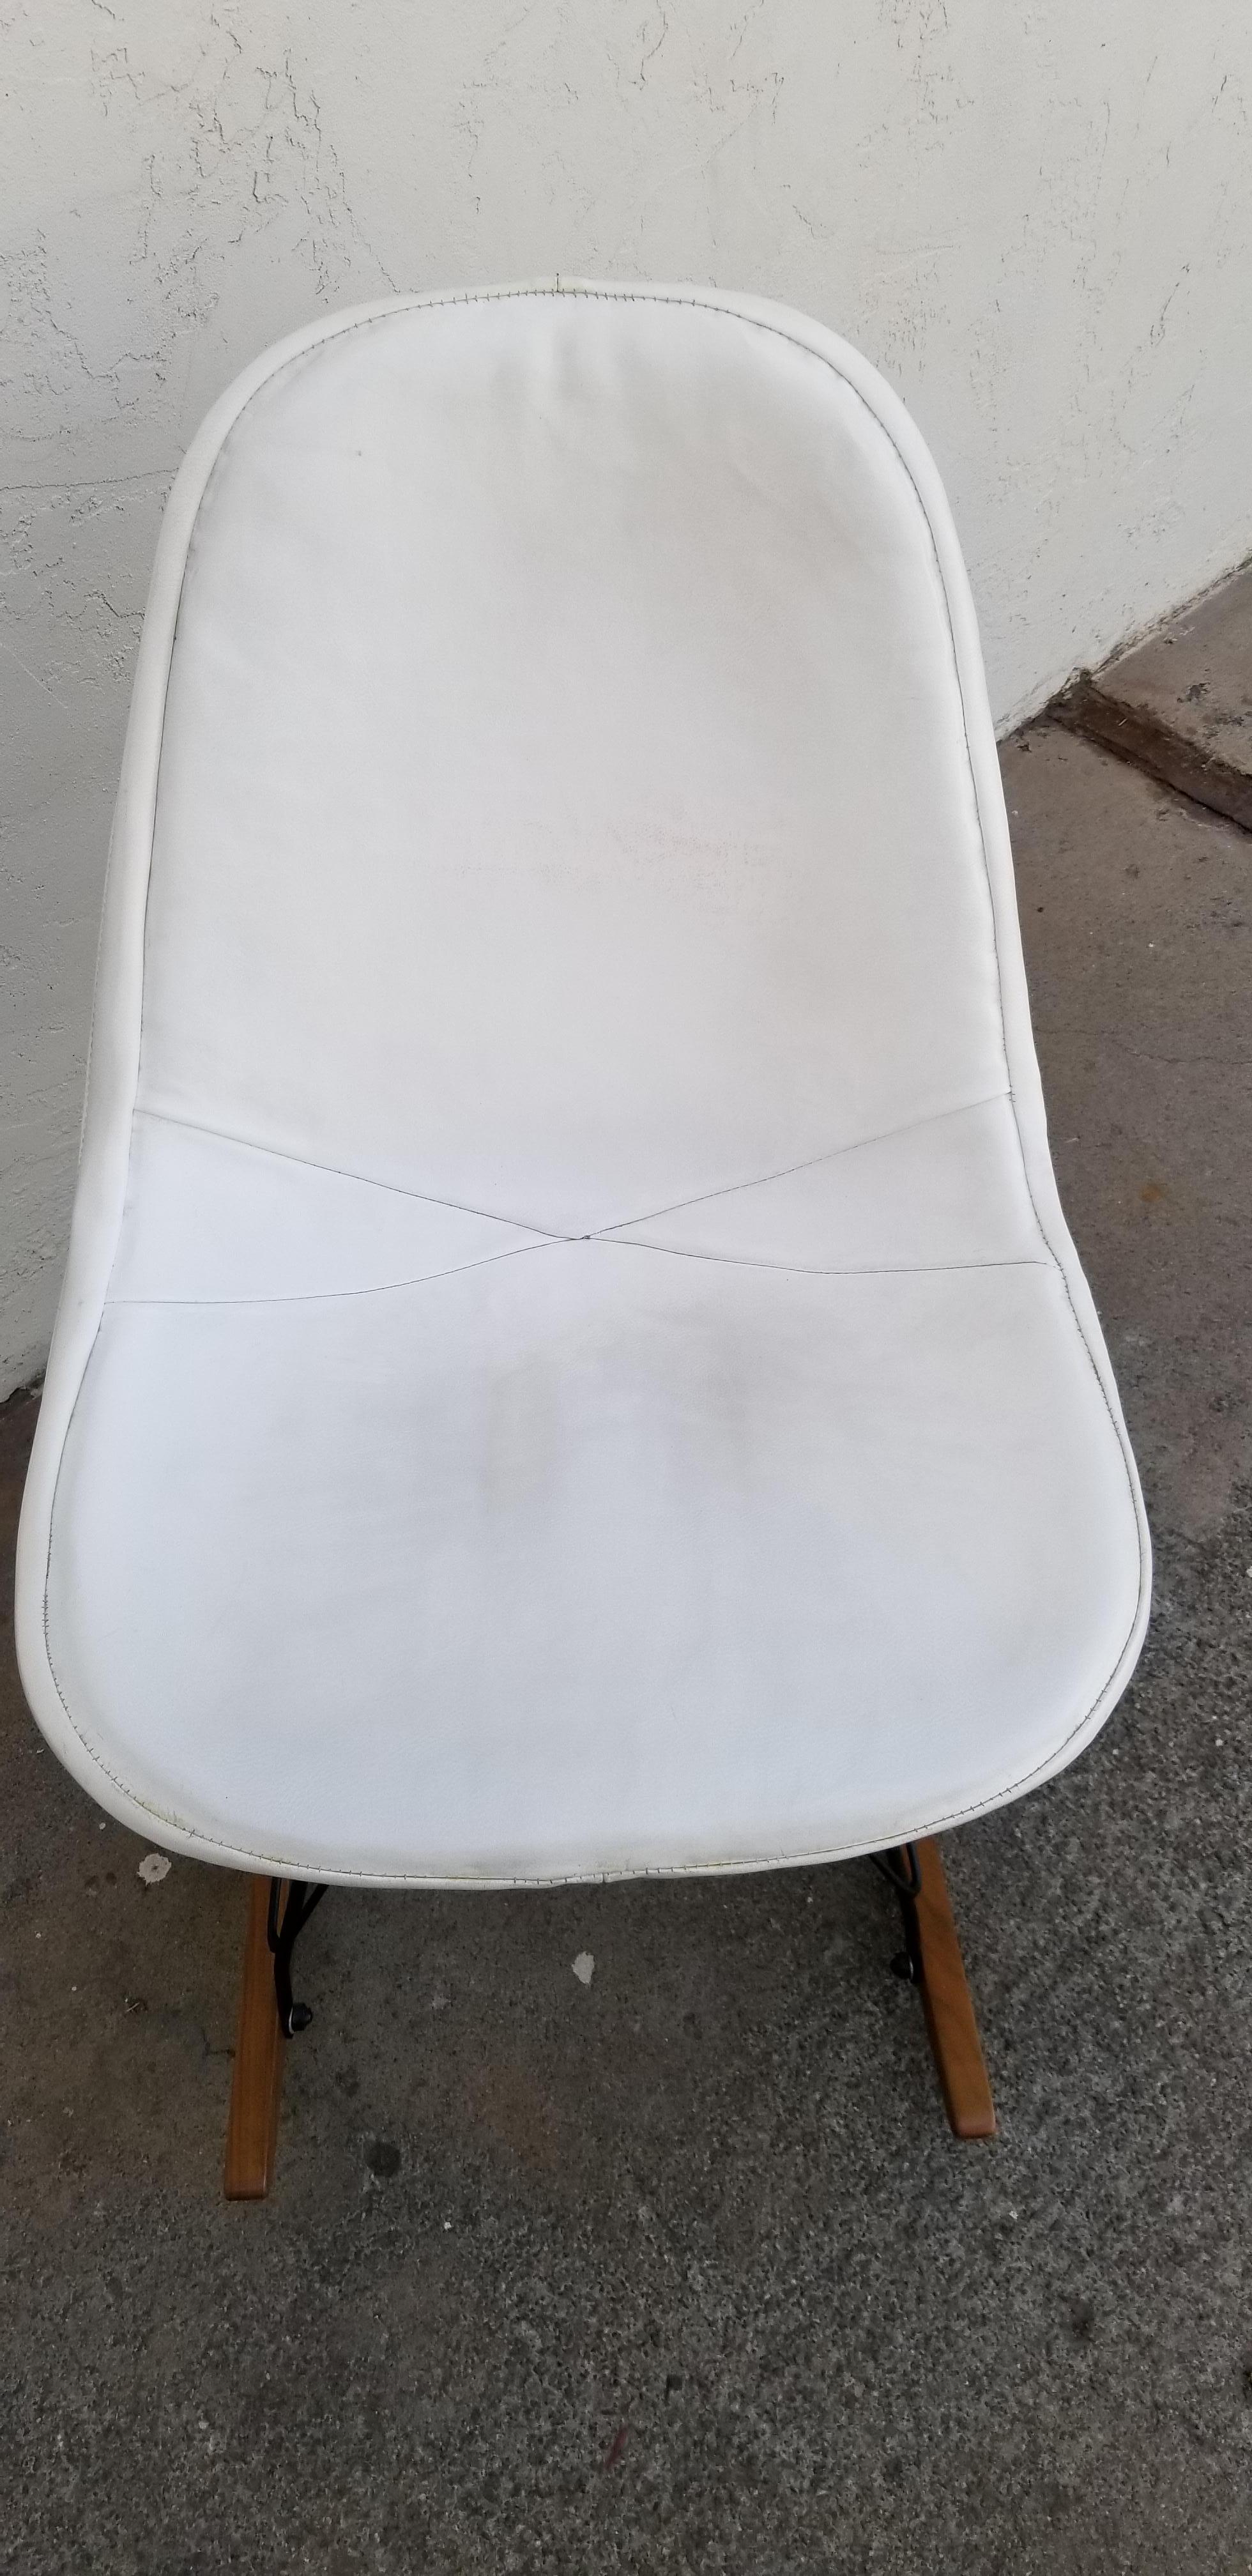 Eames RKR Rocker In Good Condition For Sale In Fulton, CA